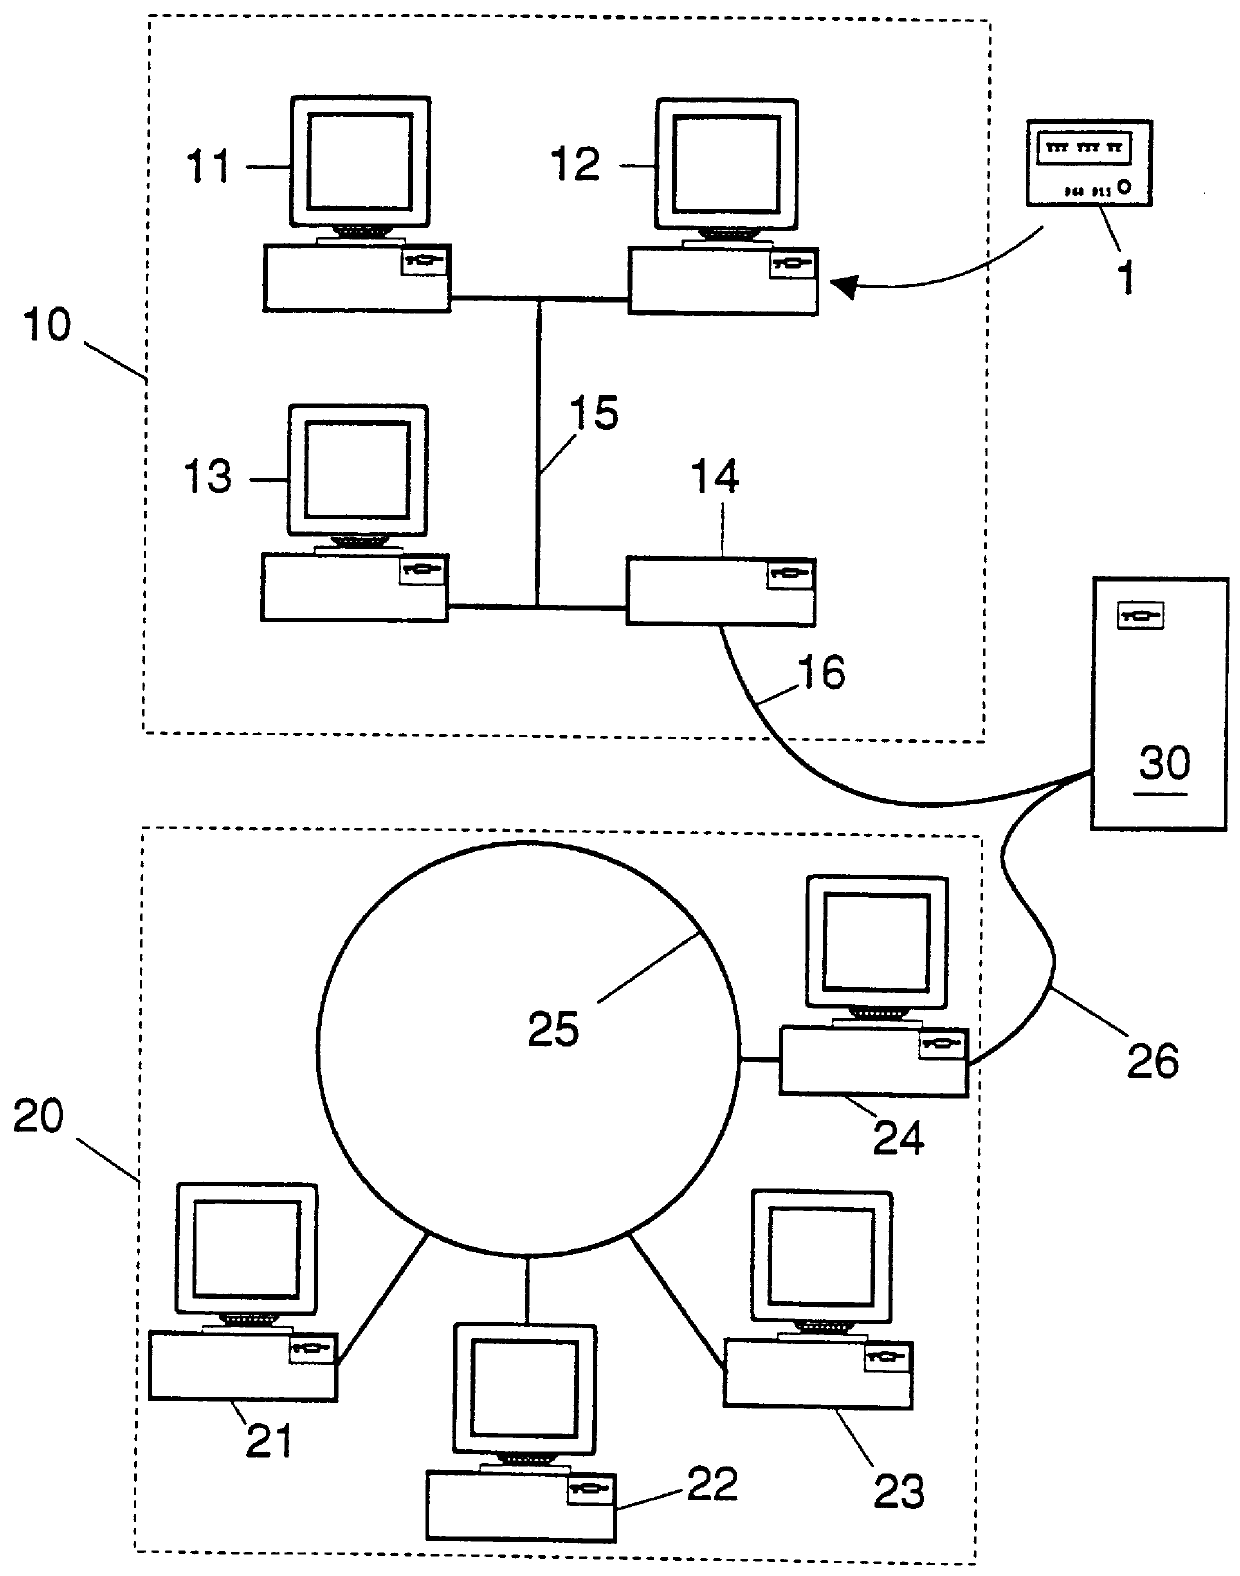 Method and apparatus for secure identification of a mobile user in a communication network